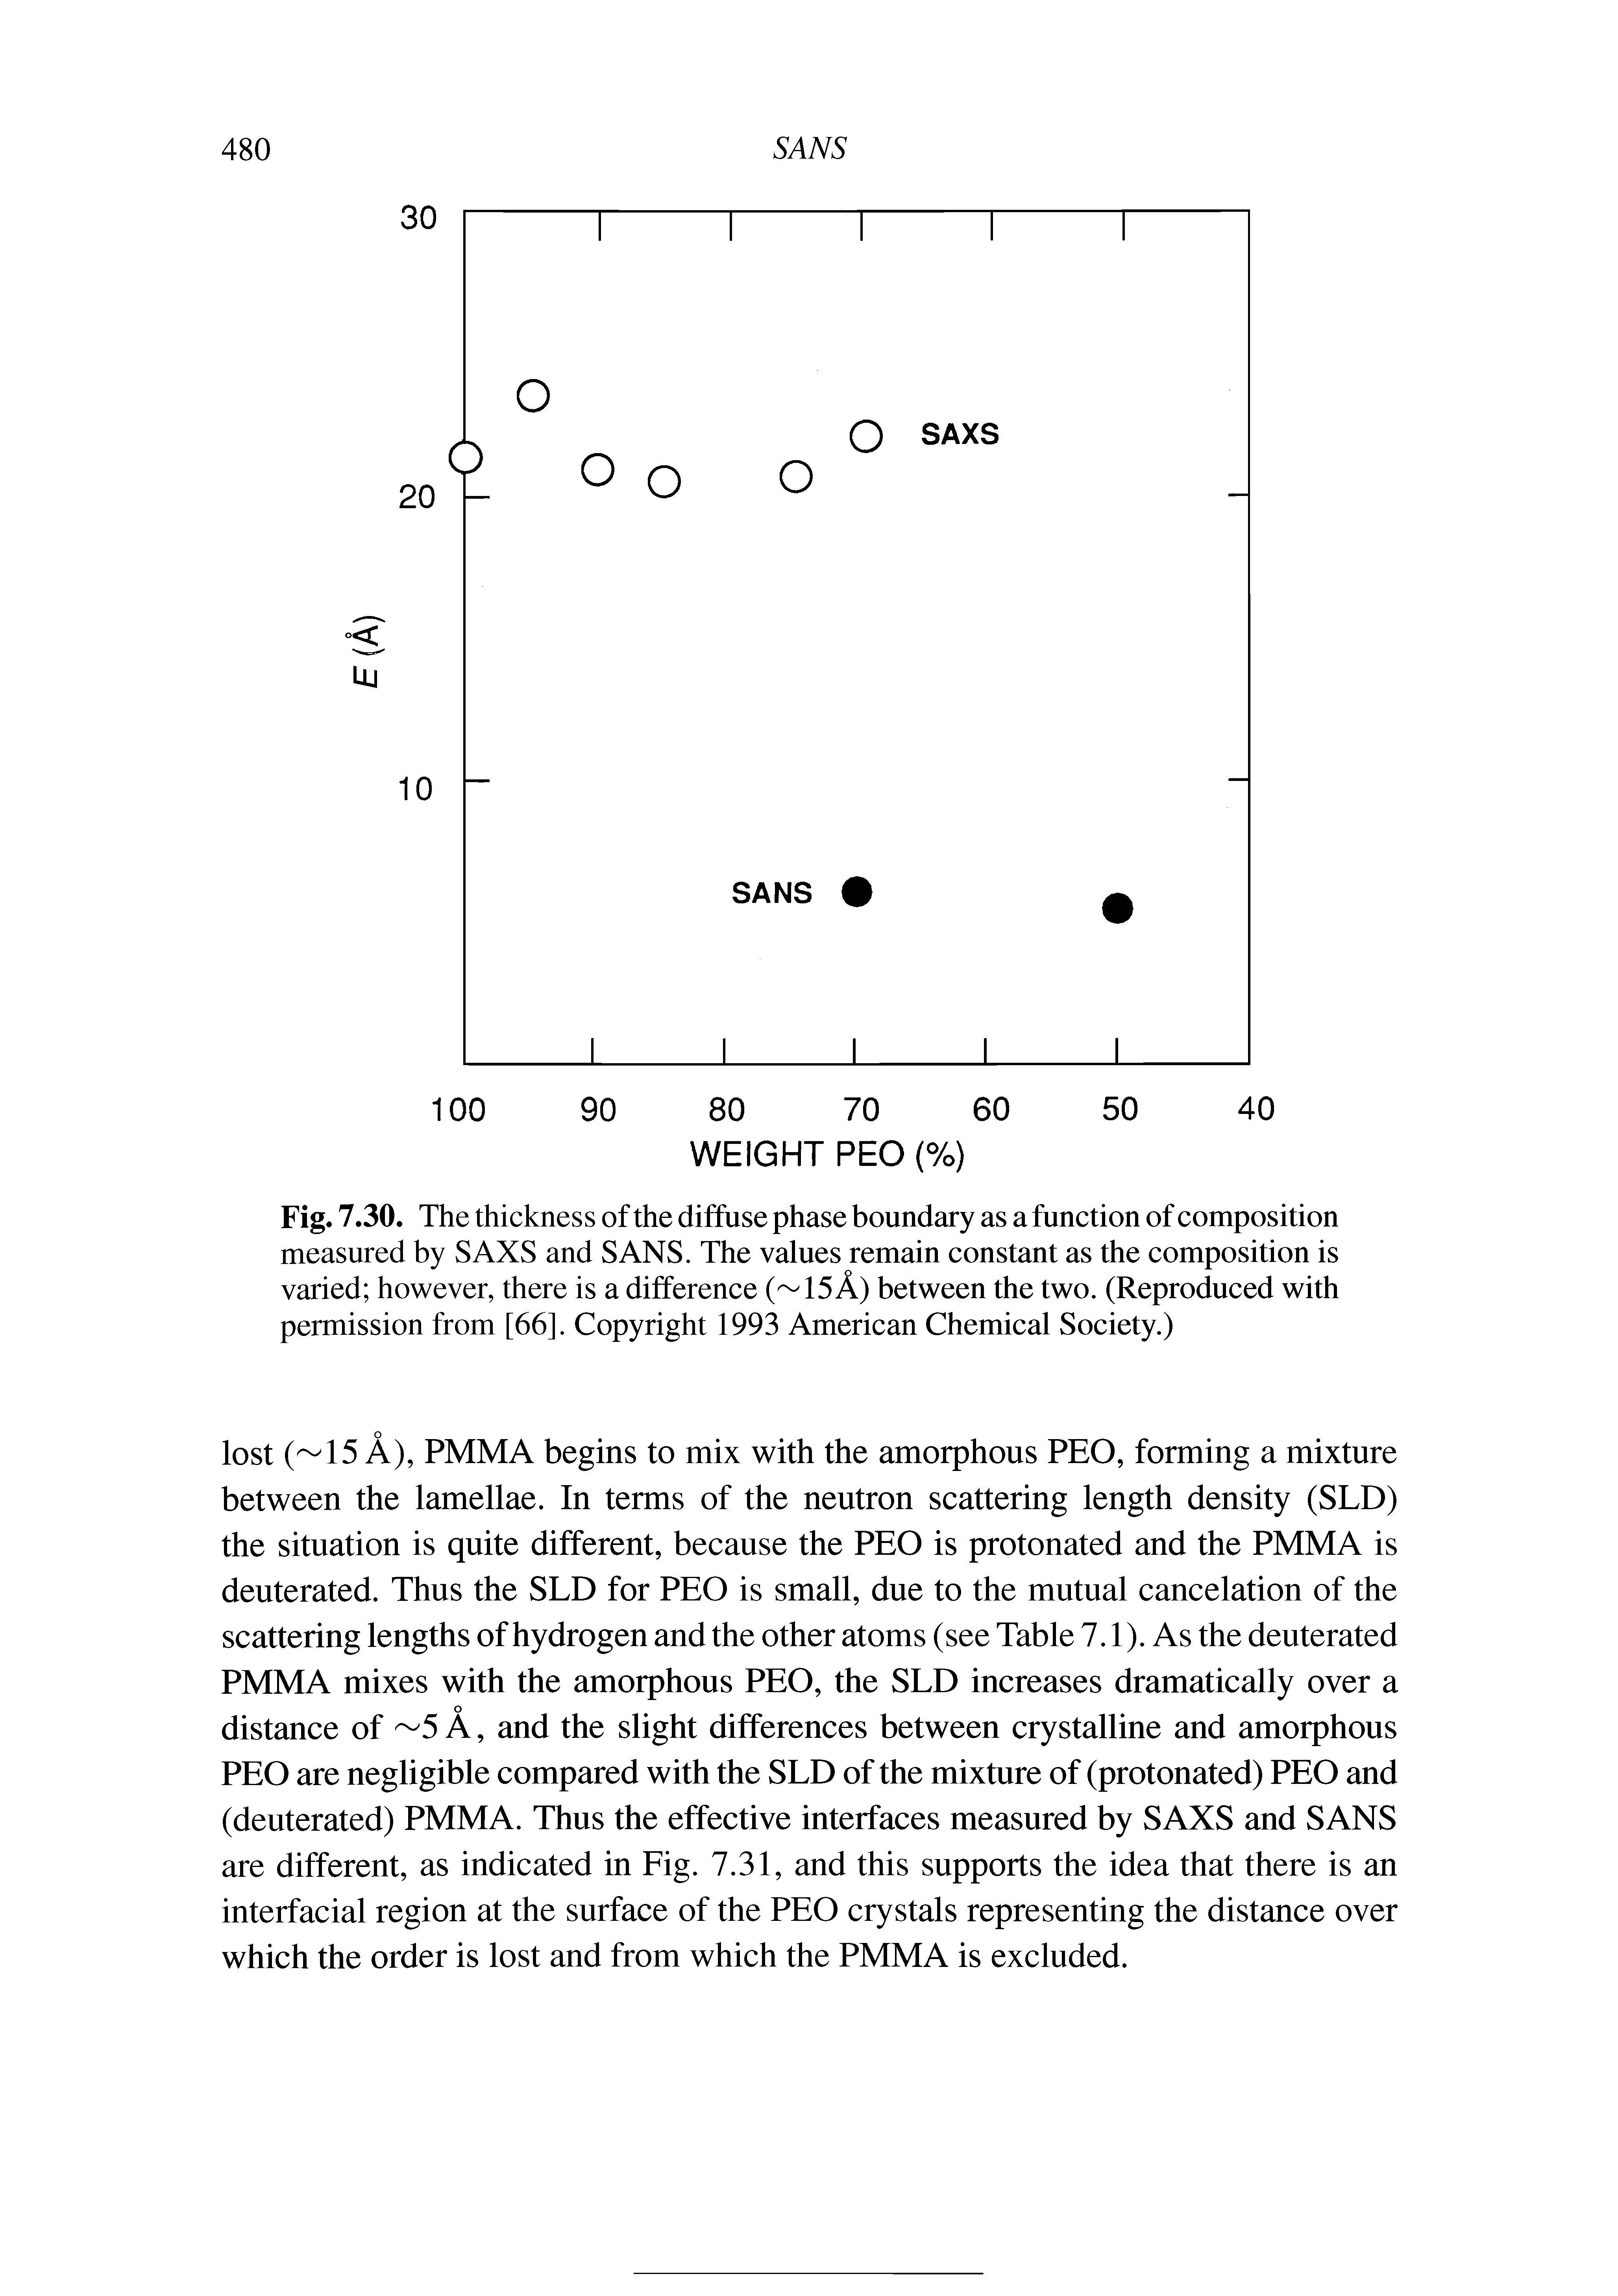 Fig. 7.30. The thickness of the diffuse phase boundary as a function of composition measured by SAXS and SANS. The values remain constant as the composition is varied however, there is a difference ( 15A) between the two. (Reproduced with permission from [66]. Copyright 1993 American Chemical Society.)...